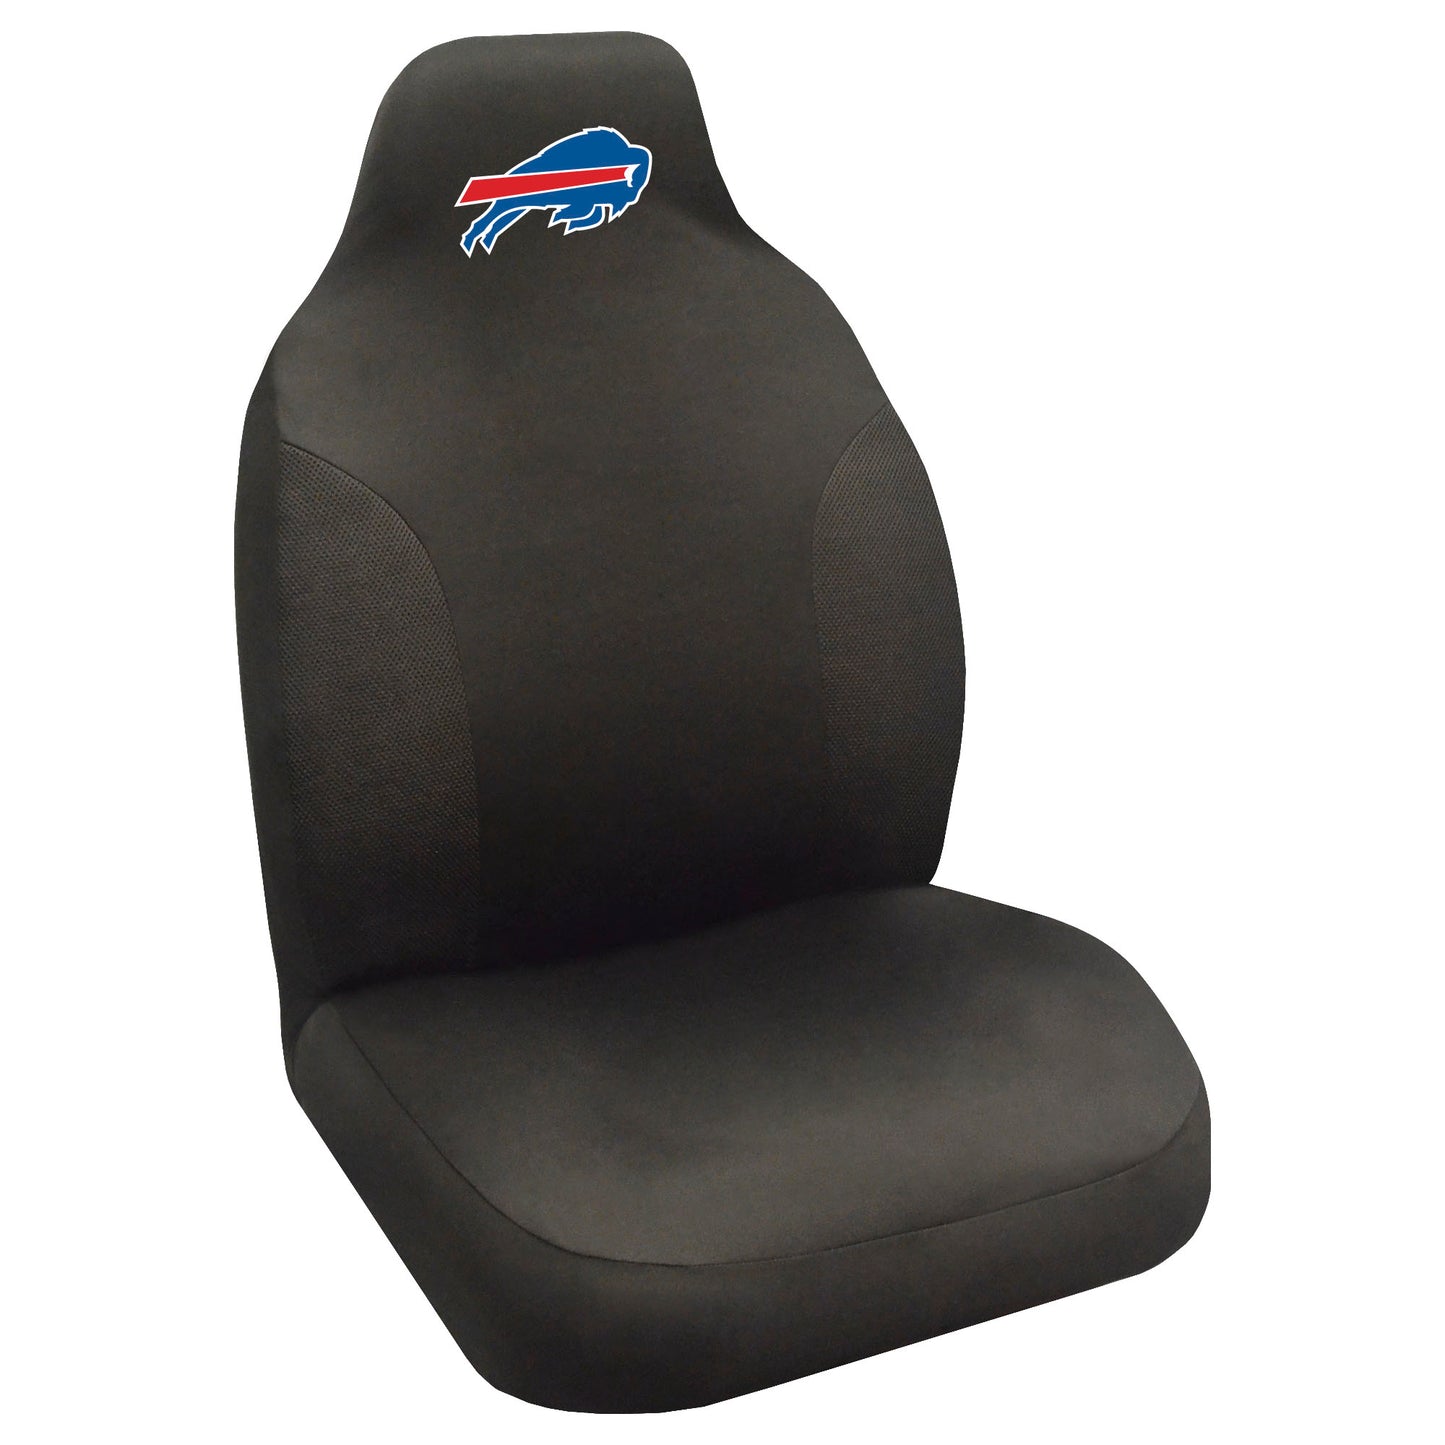 Buffalo Bills Embroidered Seat Cover